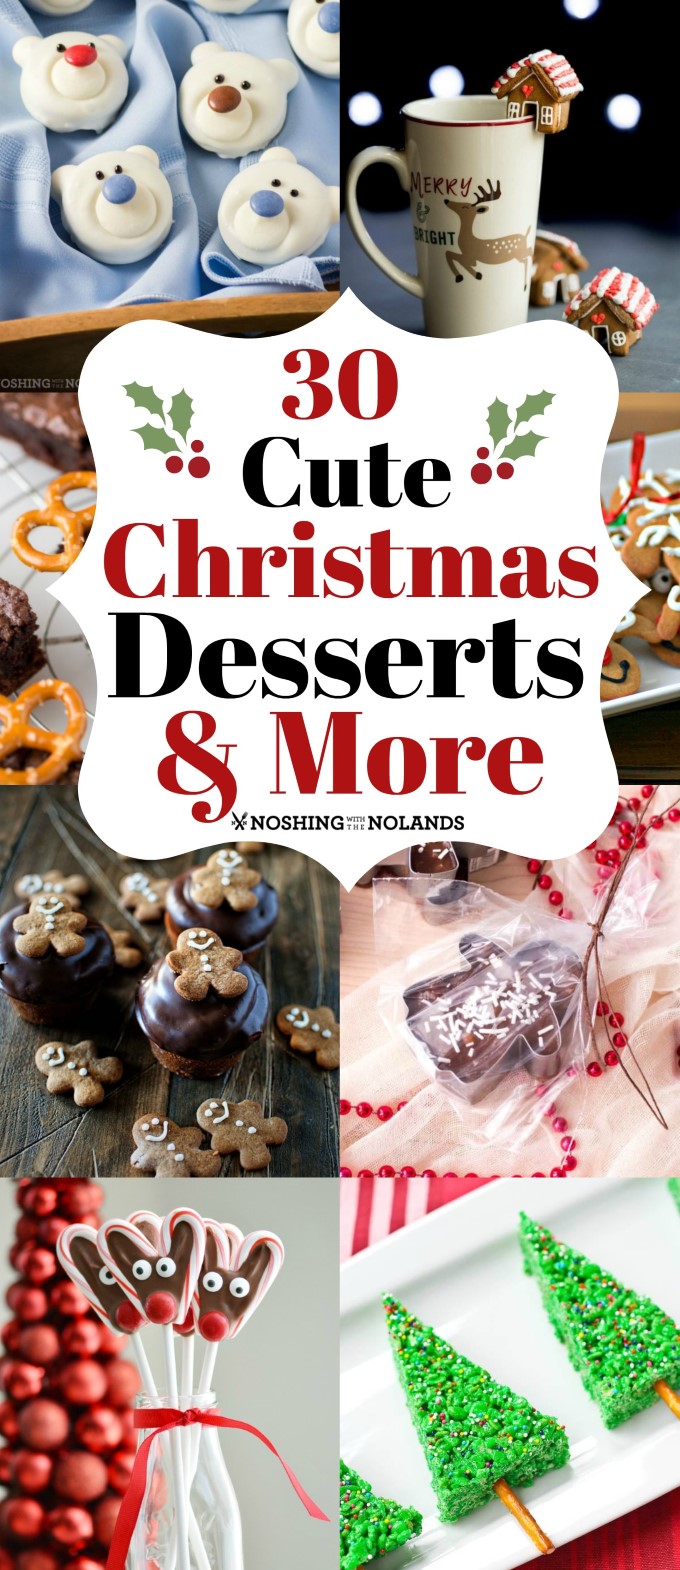 30 Cute Christmas Desserts and More will have you having fun for the holidays!! #treats #holidays #desserts #chocolate #crafts